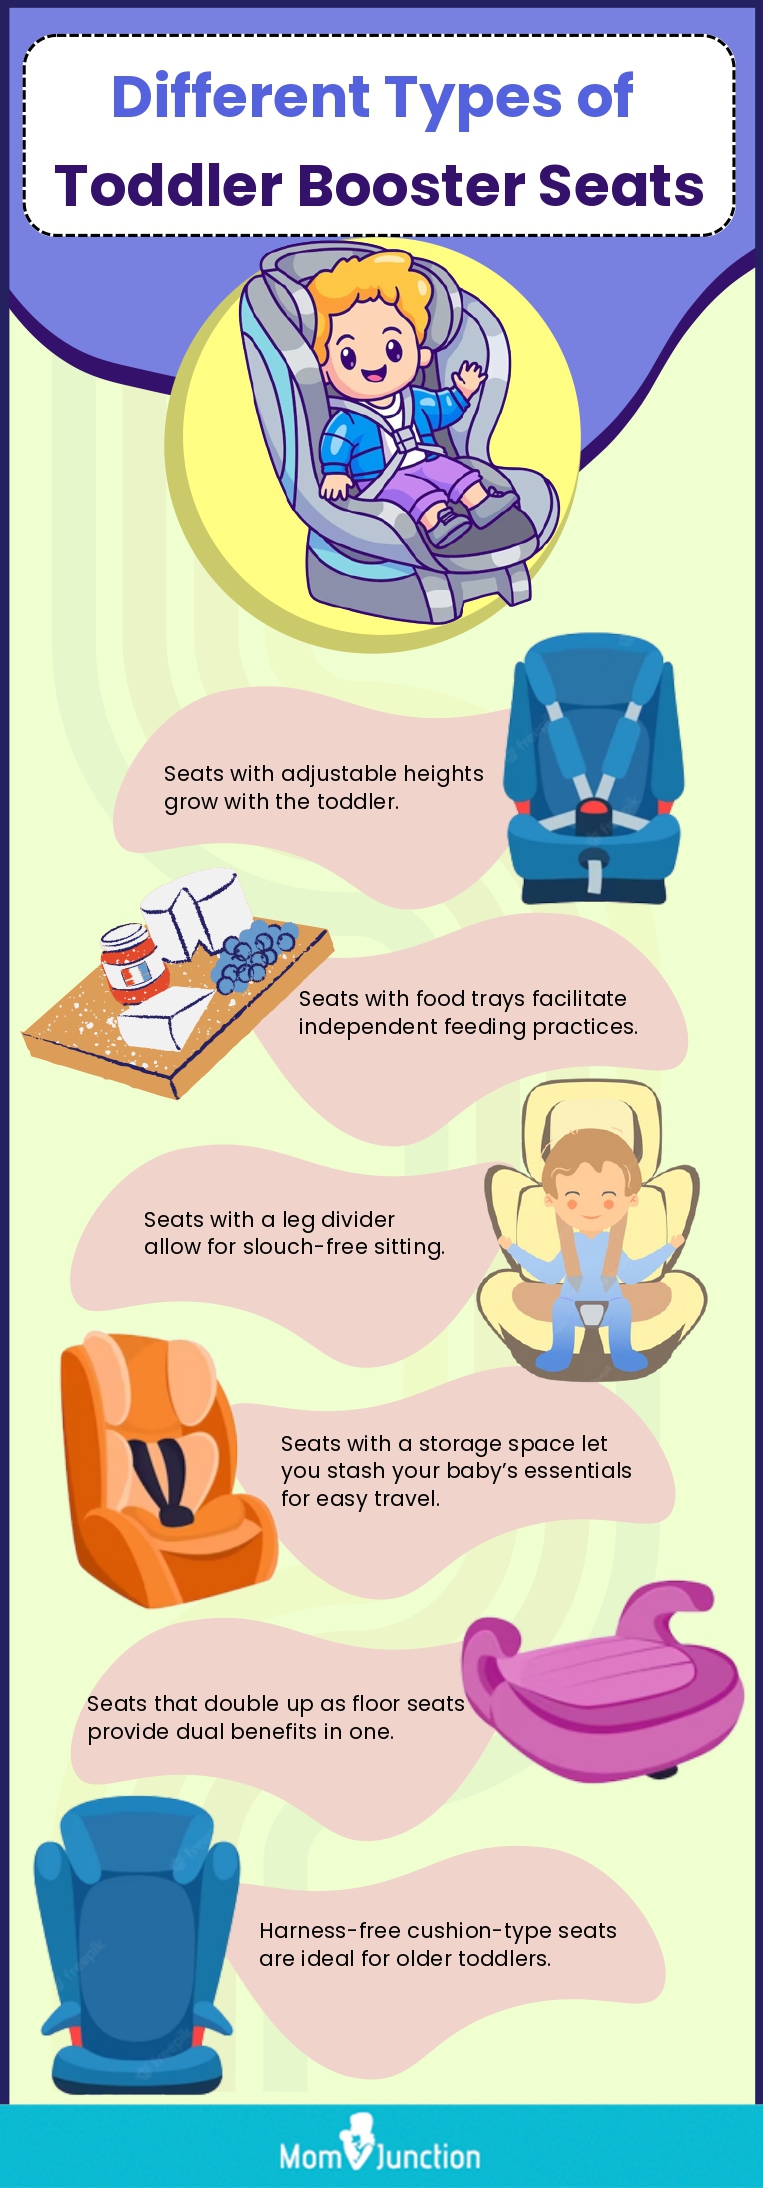 Different Types Of Toddler Booster Seats (infographic)